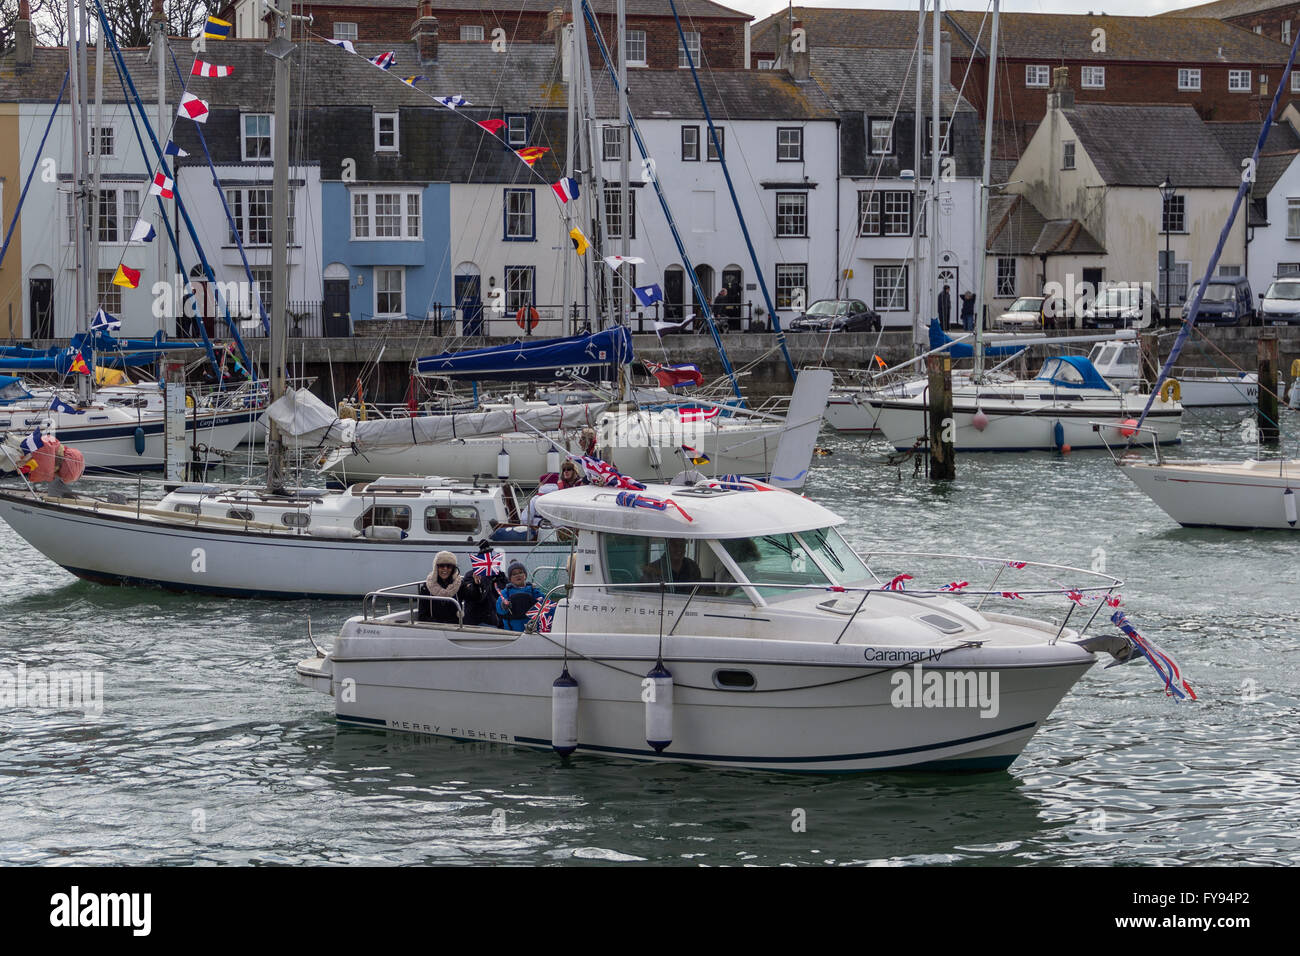 Weymouth, England. 23 April 2016. Queen's 90th Birthday Floating Tribute. Weymouth, England, 23 April 2016, Caramac IV. Credit:  Frances Underwood/Alamy Live News Stock Photo